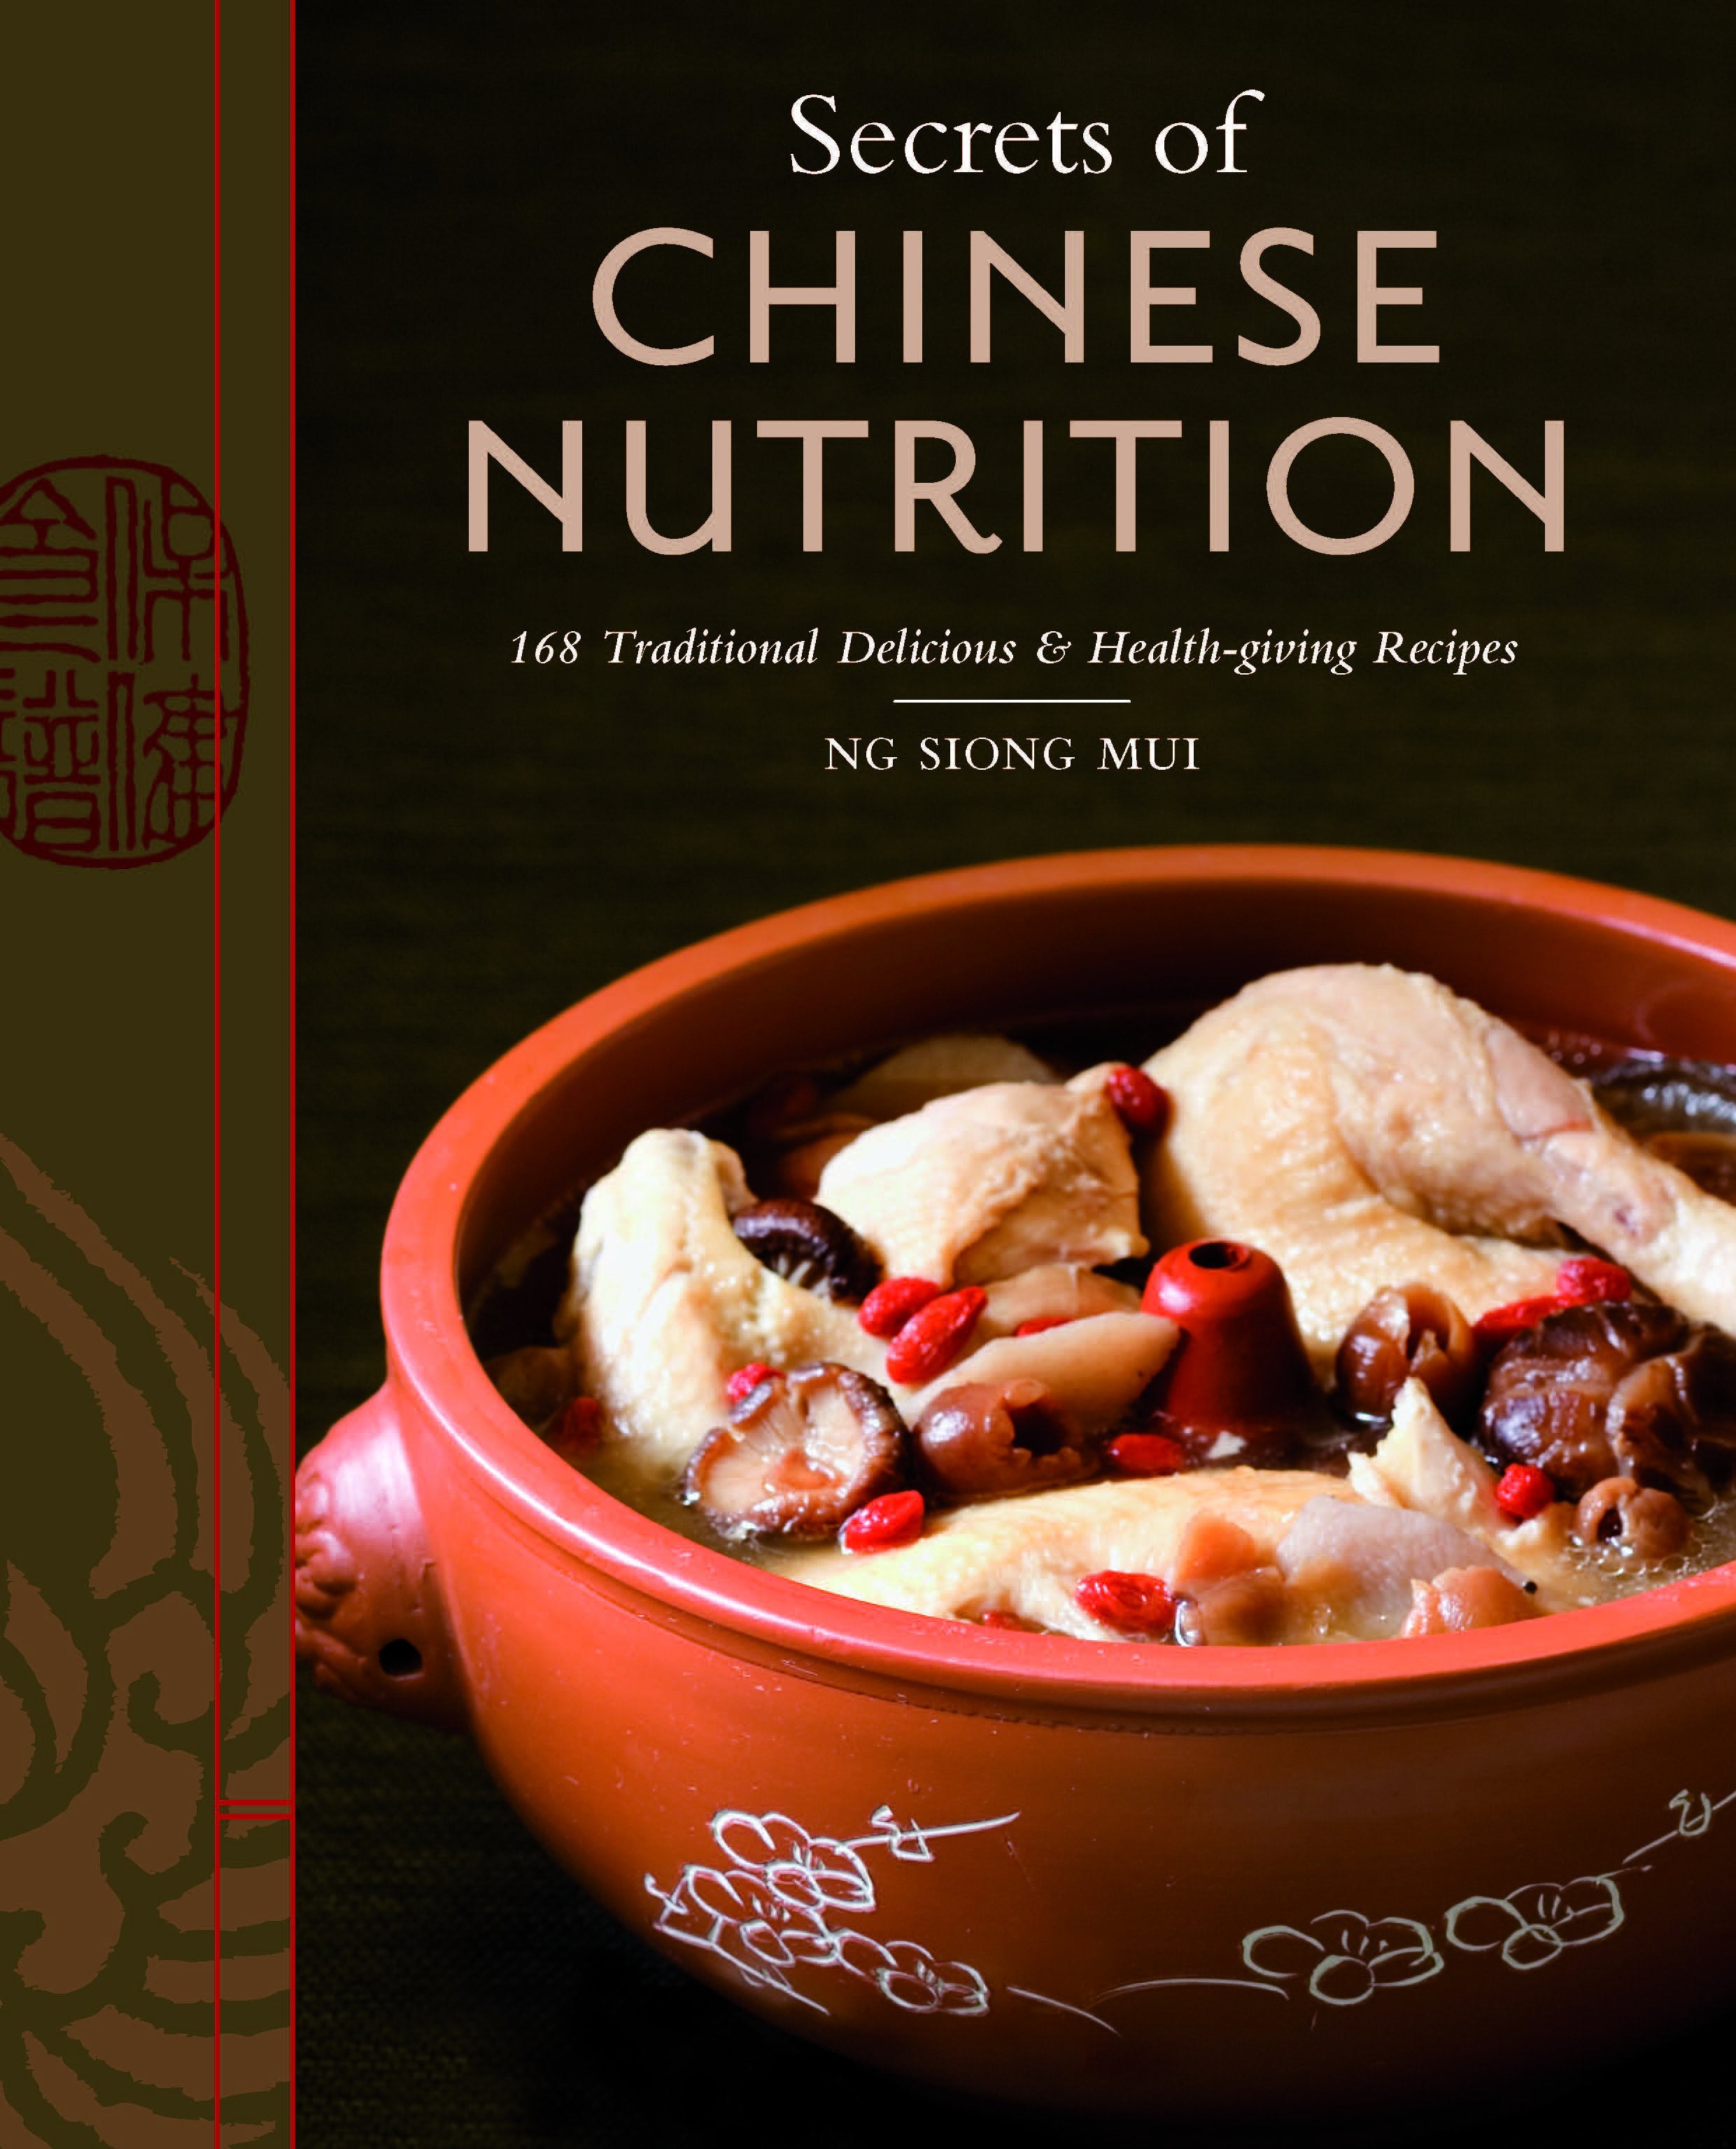 Secrets of Chinese Nutrition